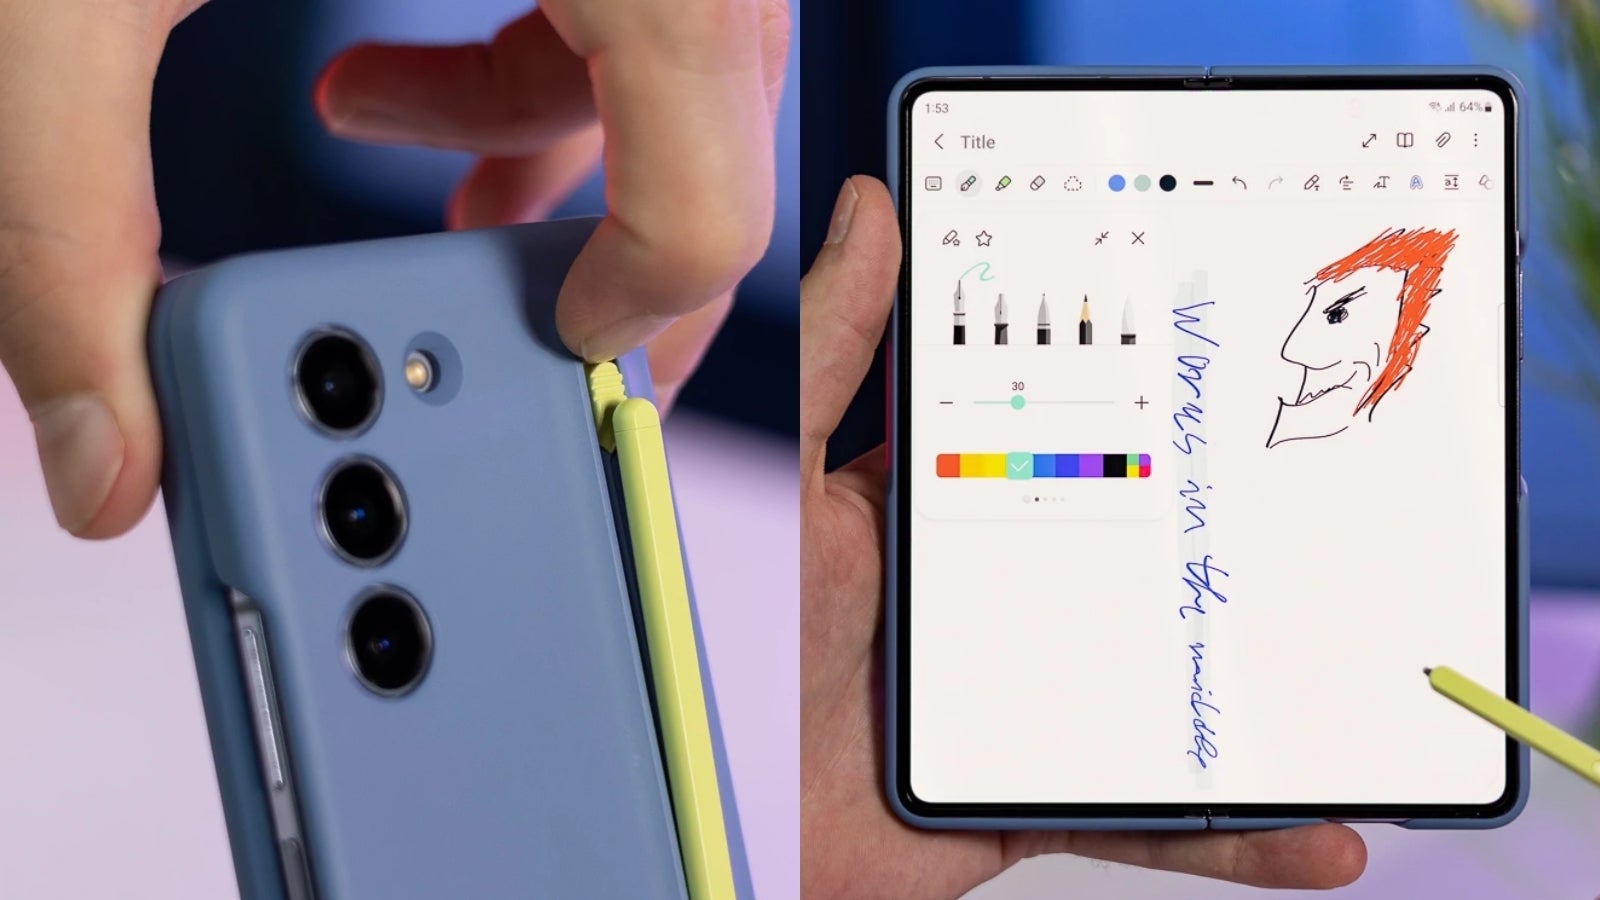 Galaxy Z Fold 5 has unrivalled multitasking capabilities in the world of foldables. The new, smaller S Pen looks nice too. Although I'd never use it. - Galaxy Z Fold 5 is the first Samsung foldable “normal” people should care about